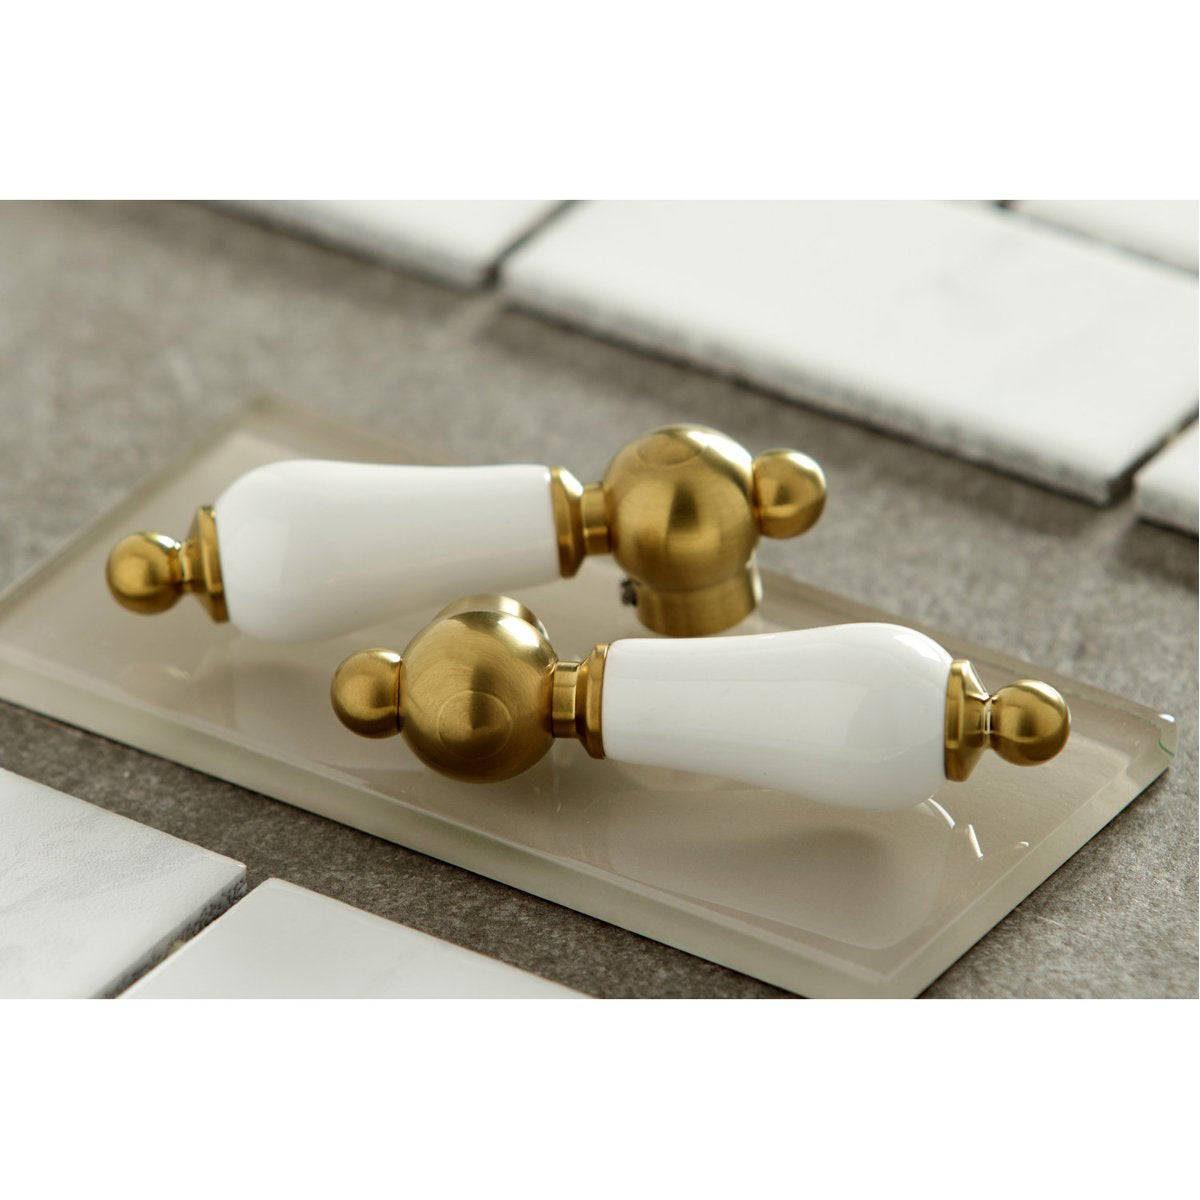 Kingston Brass Heritage 4-Inch Centerset Deck Mount Bathroom Faucet with Pop-Up Drain